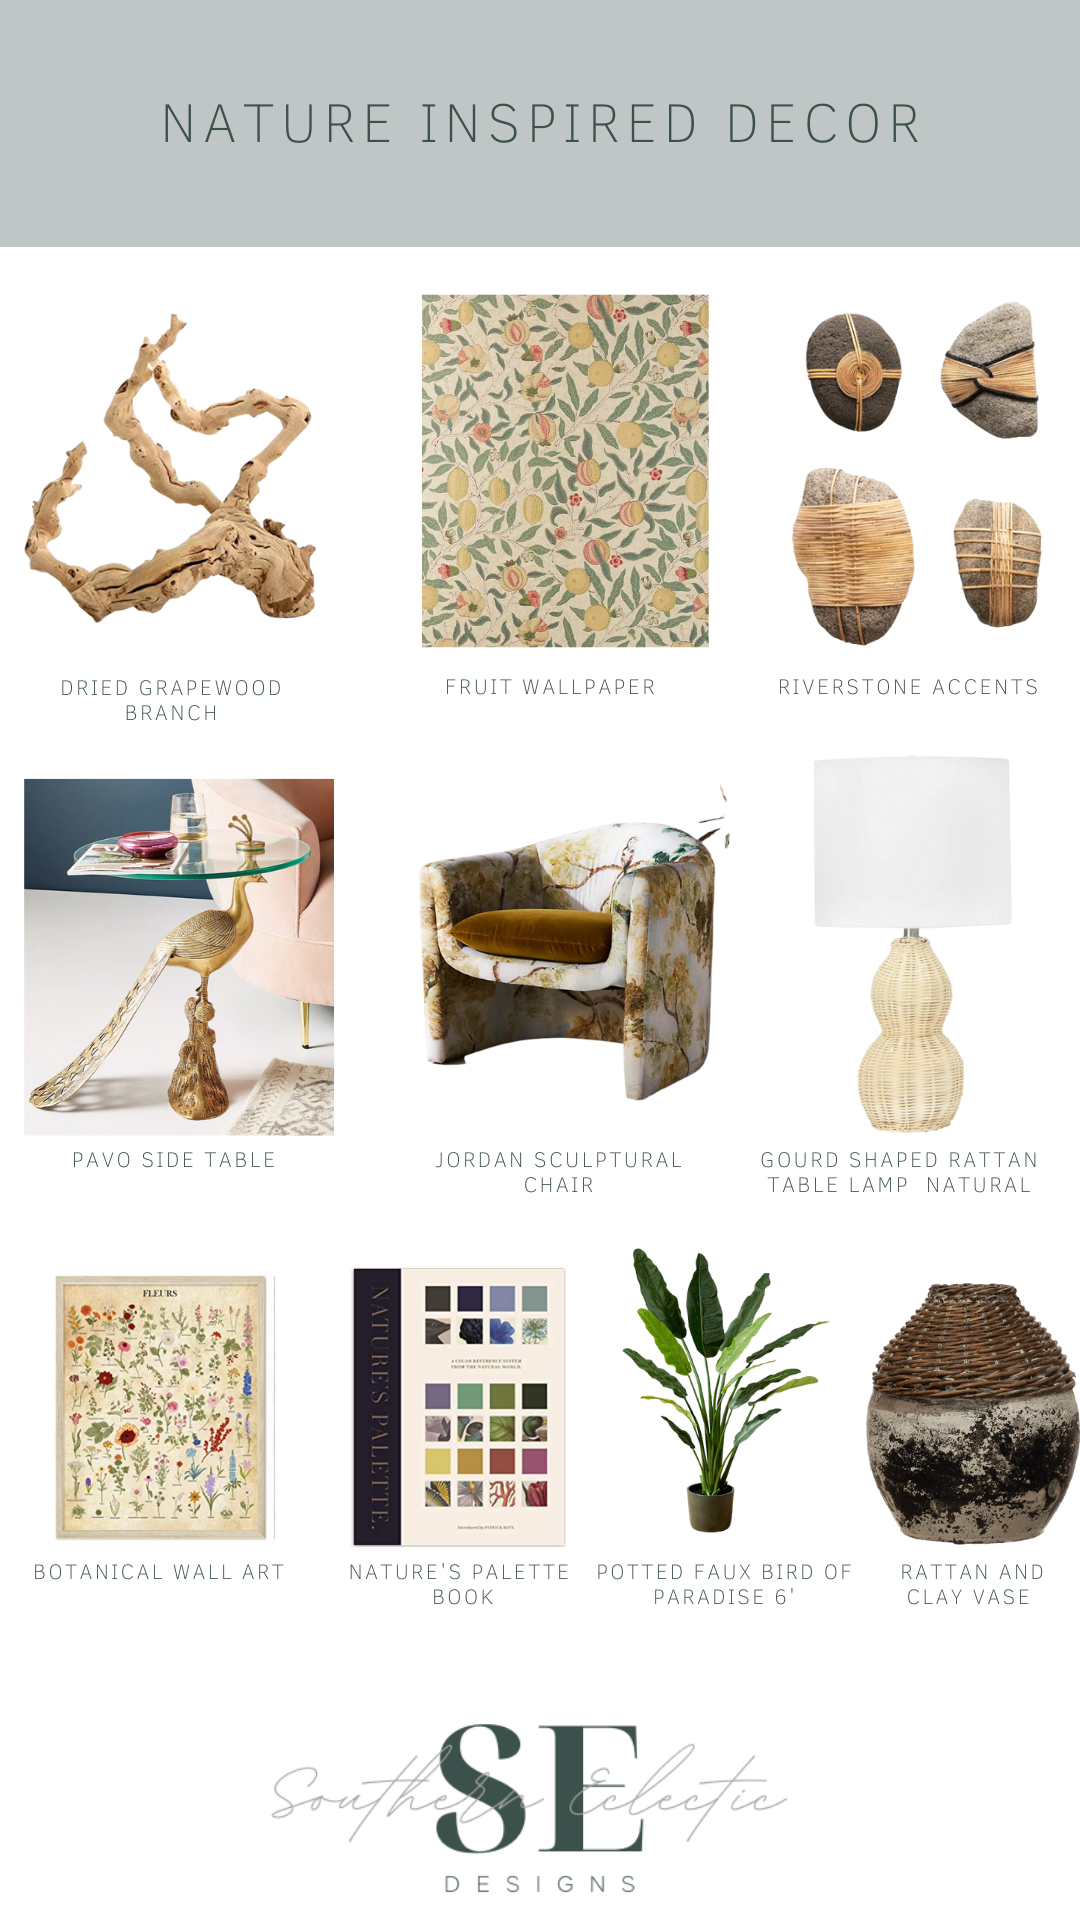 Southern Eclectic Designs
Nature Inspired Decor